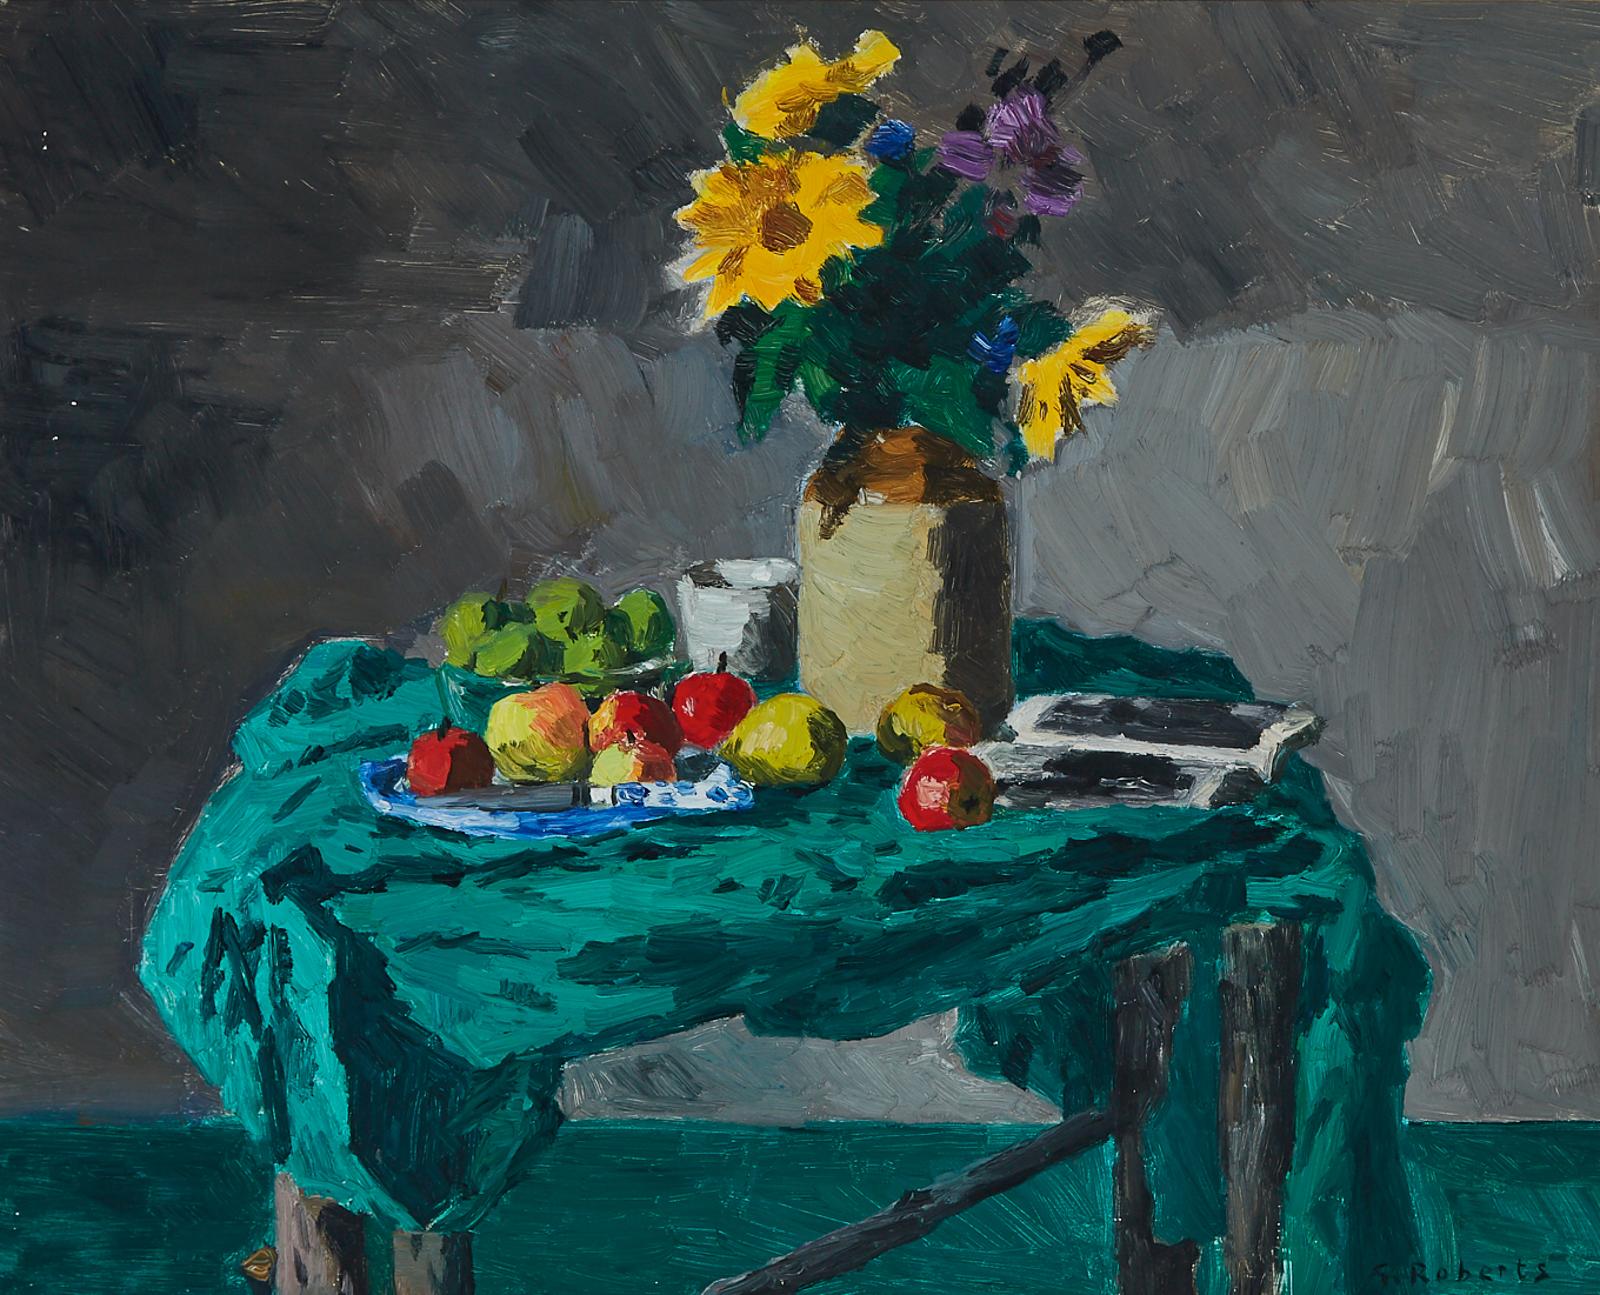 William Goodridge Roberts (1921-2001) - Still Life With Flowers, Apples, And Green Cloth